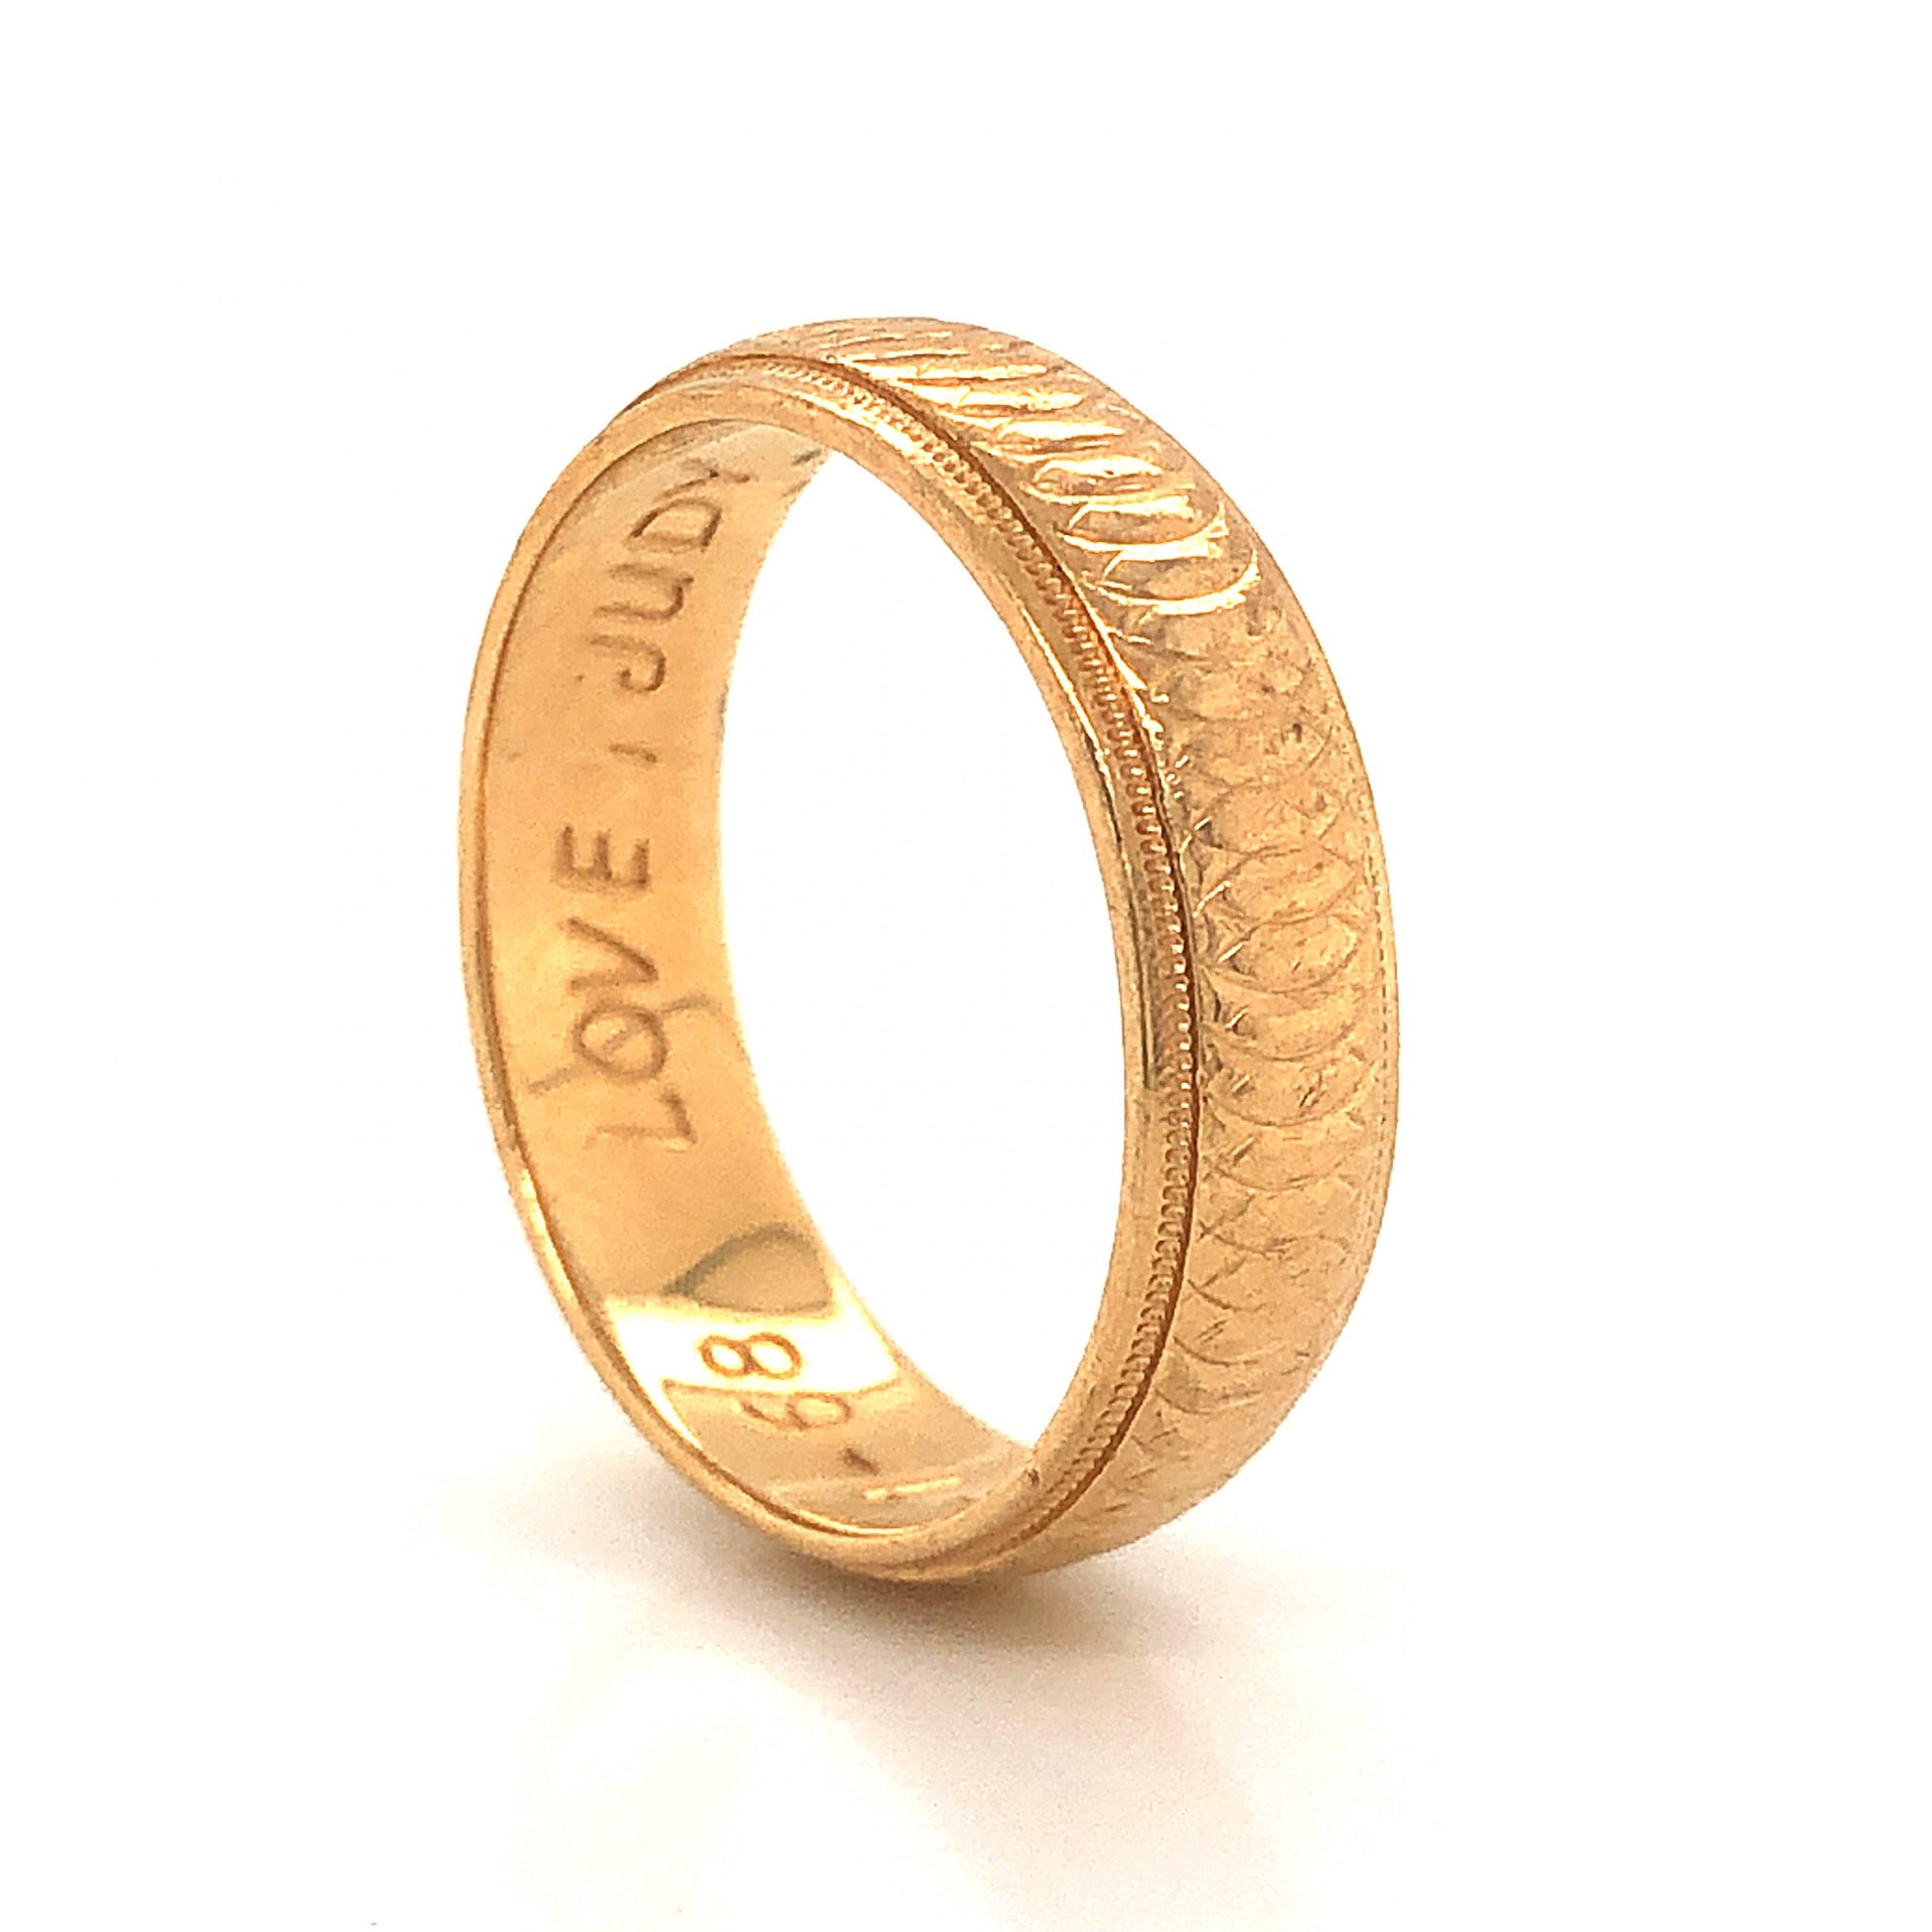 Mid-Century 5.8mm Engraved Wedding Band in 14k Yellow GoldComposition: PlatinumRing Size: 8.5Total Gram Weight: 5.0 gInscription: 14k 6-1-68 LOVE, JUDY